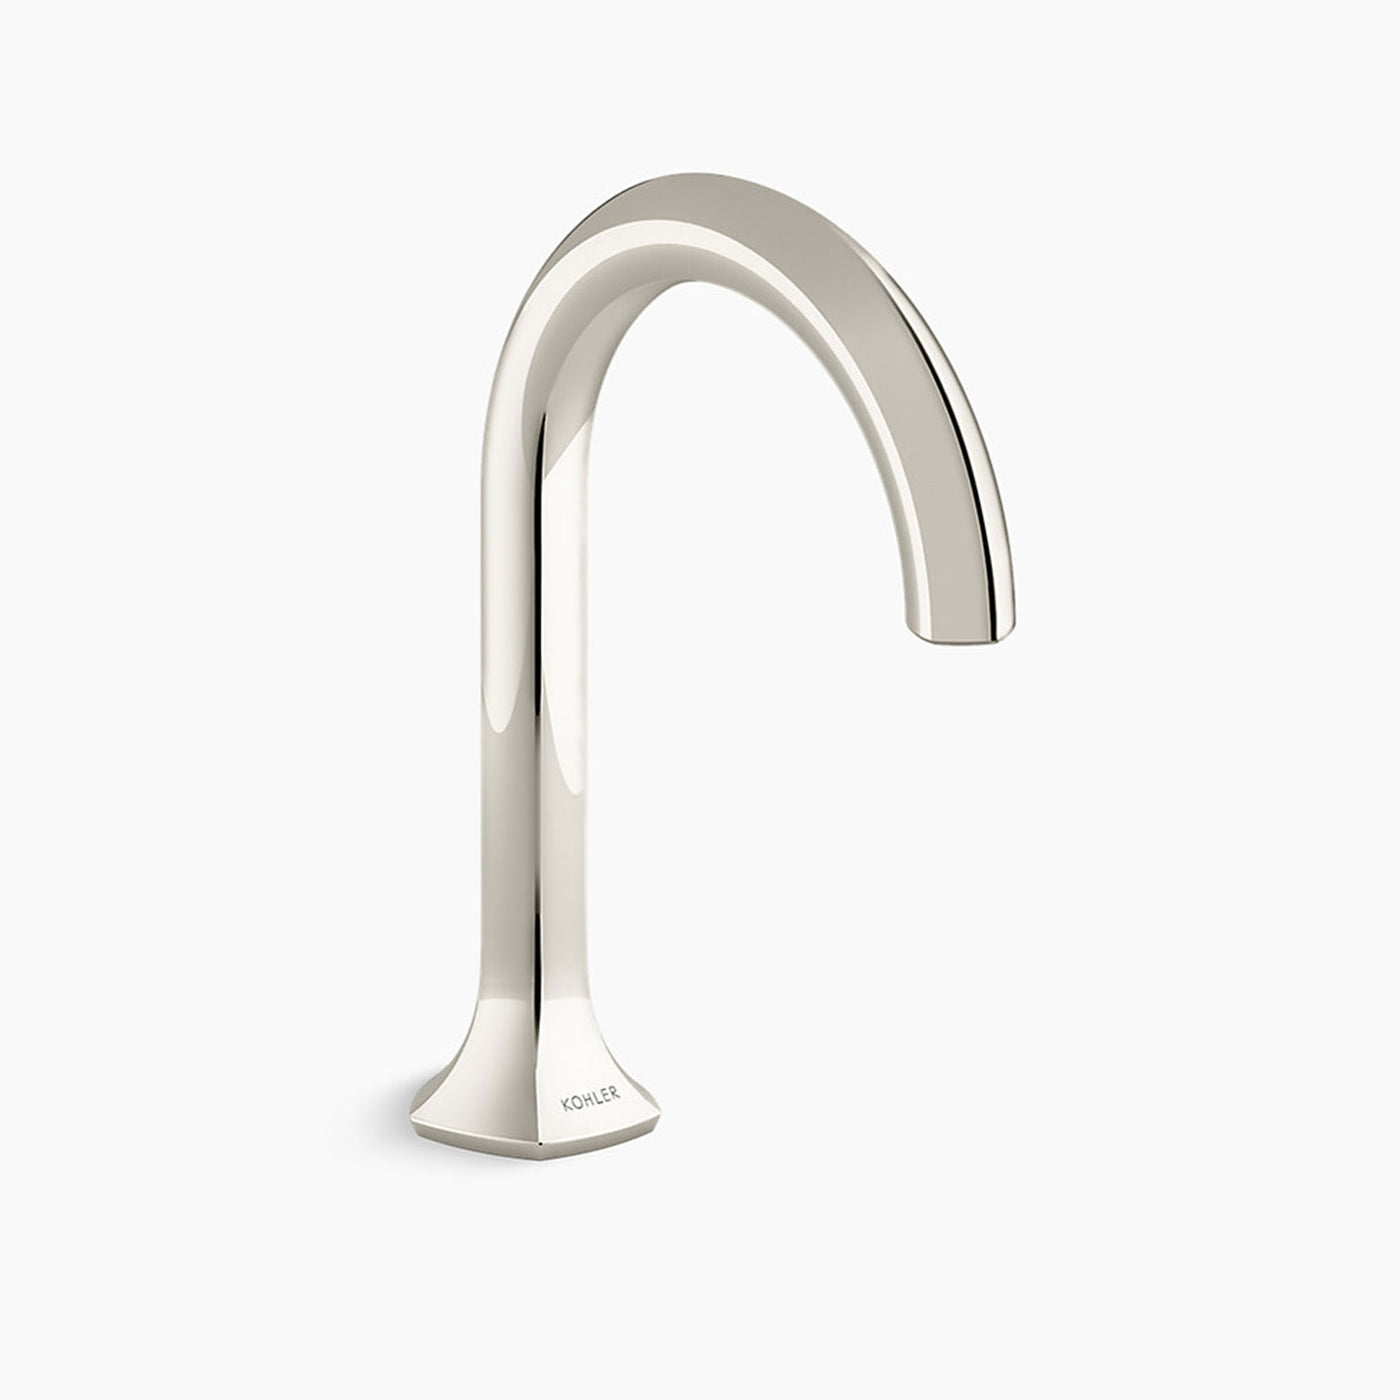 Occasion™ Bathroom sink faucet spout with Cane design, 1.2 gpm